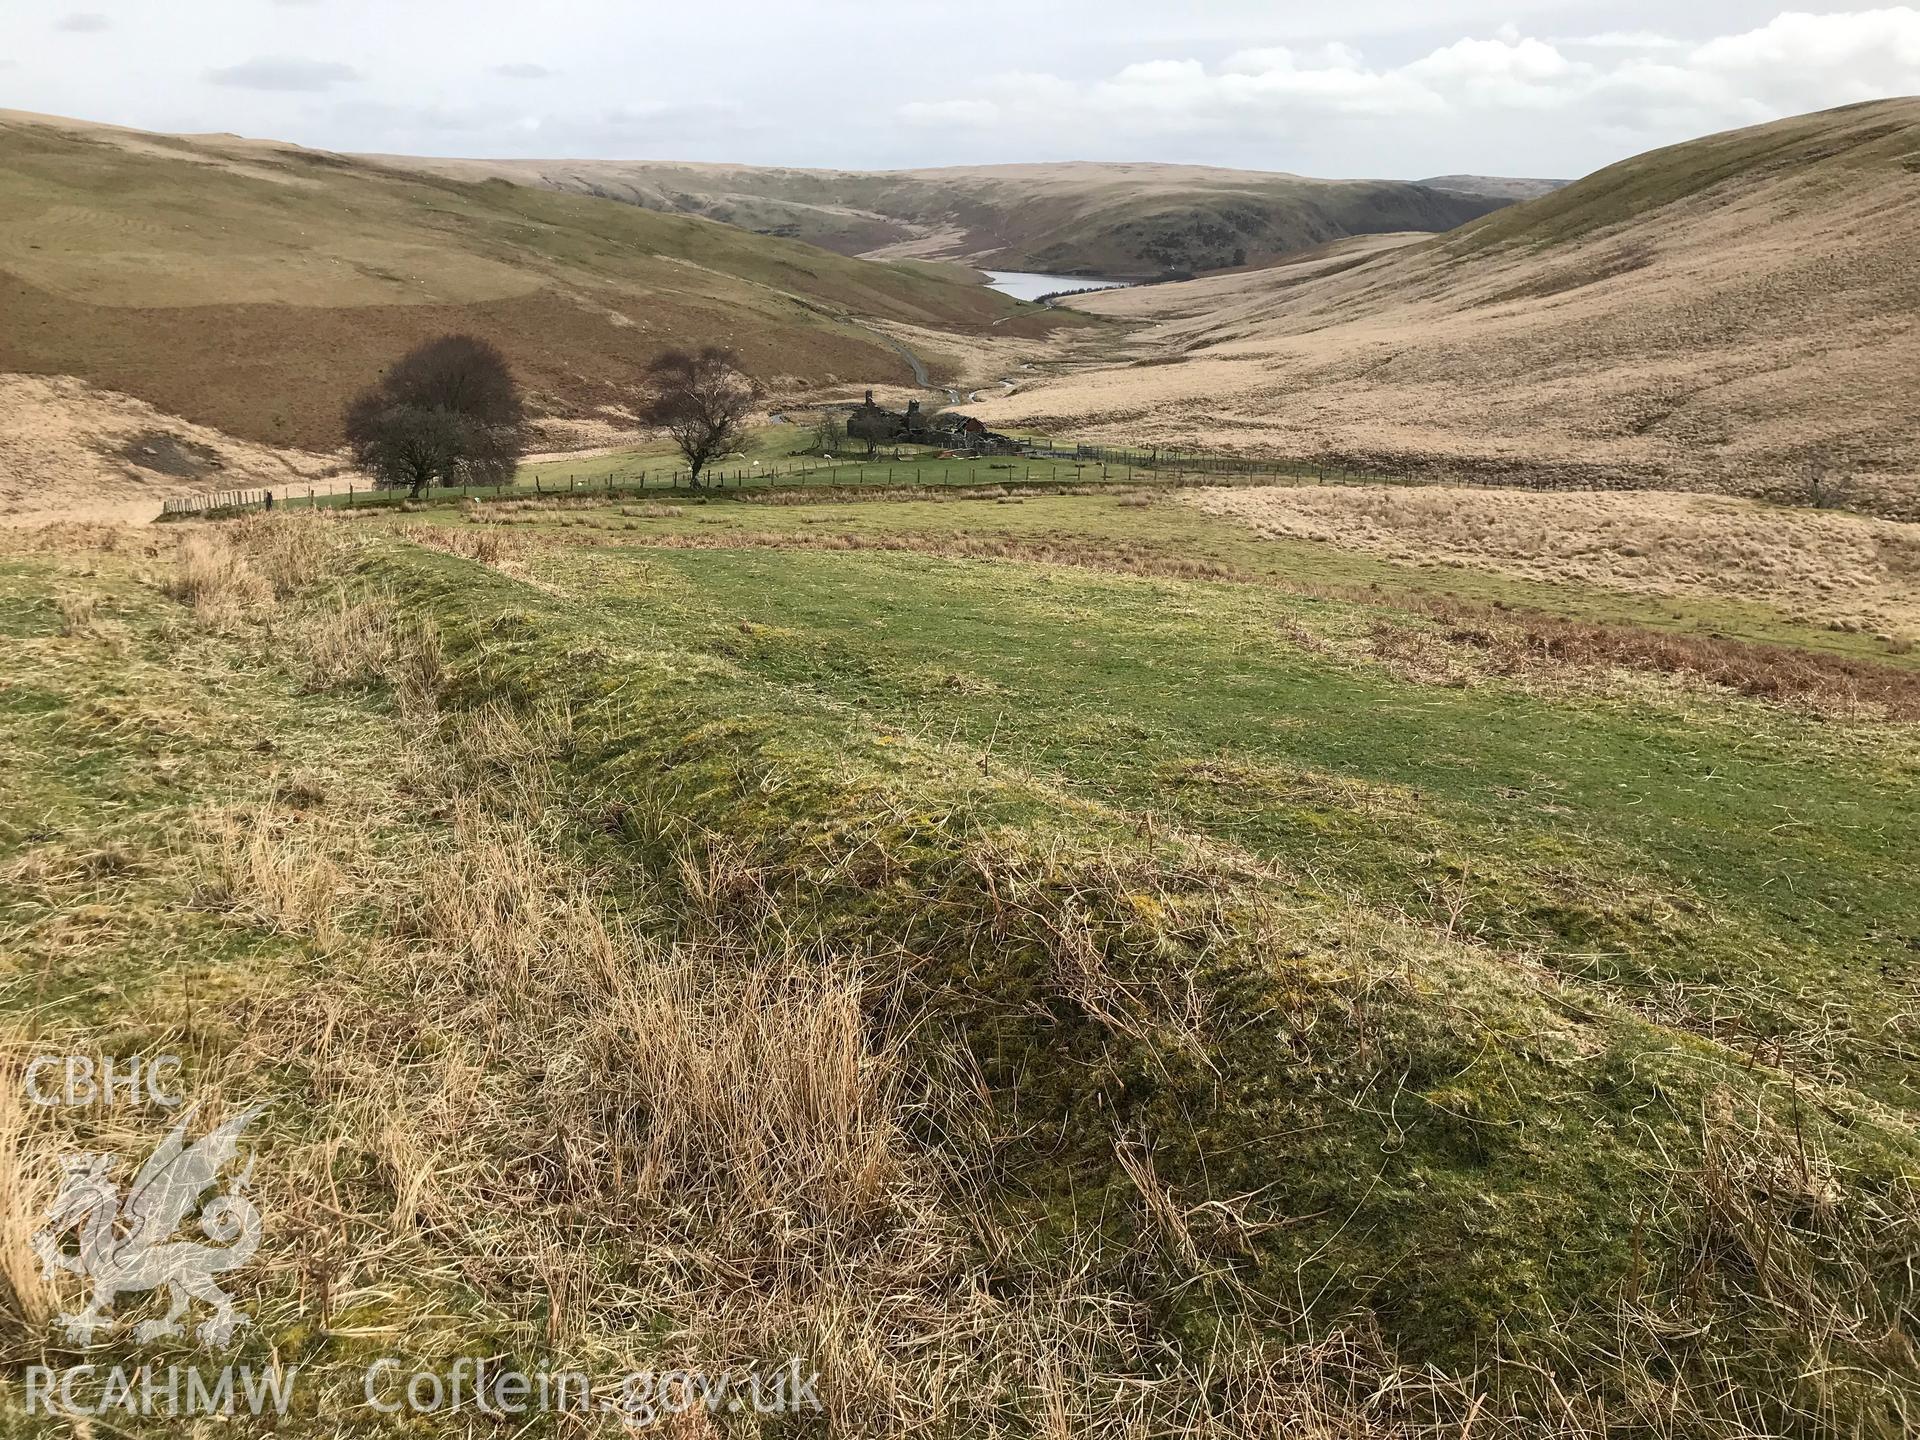 Colour photograph of Lluest Aber Caethon deserted farmstead, west of Rhayader, taken by Paul R. Davis on 23rd March 2019.